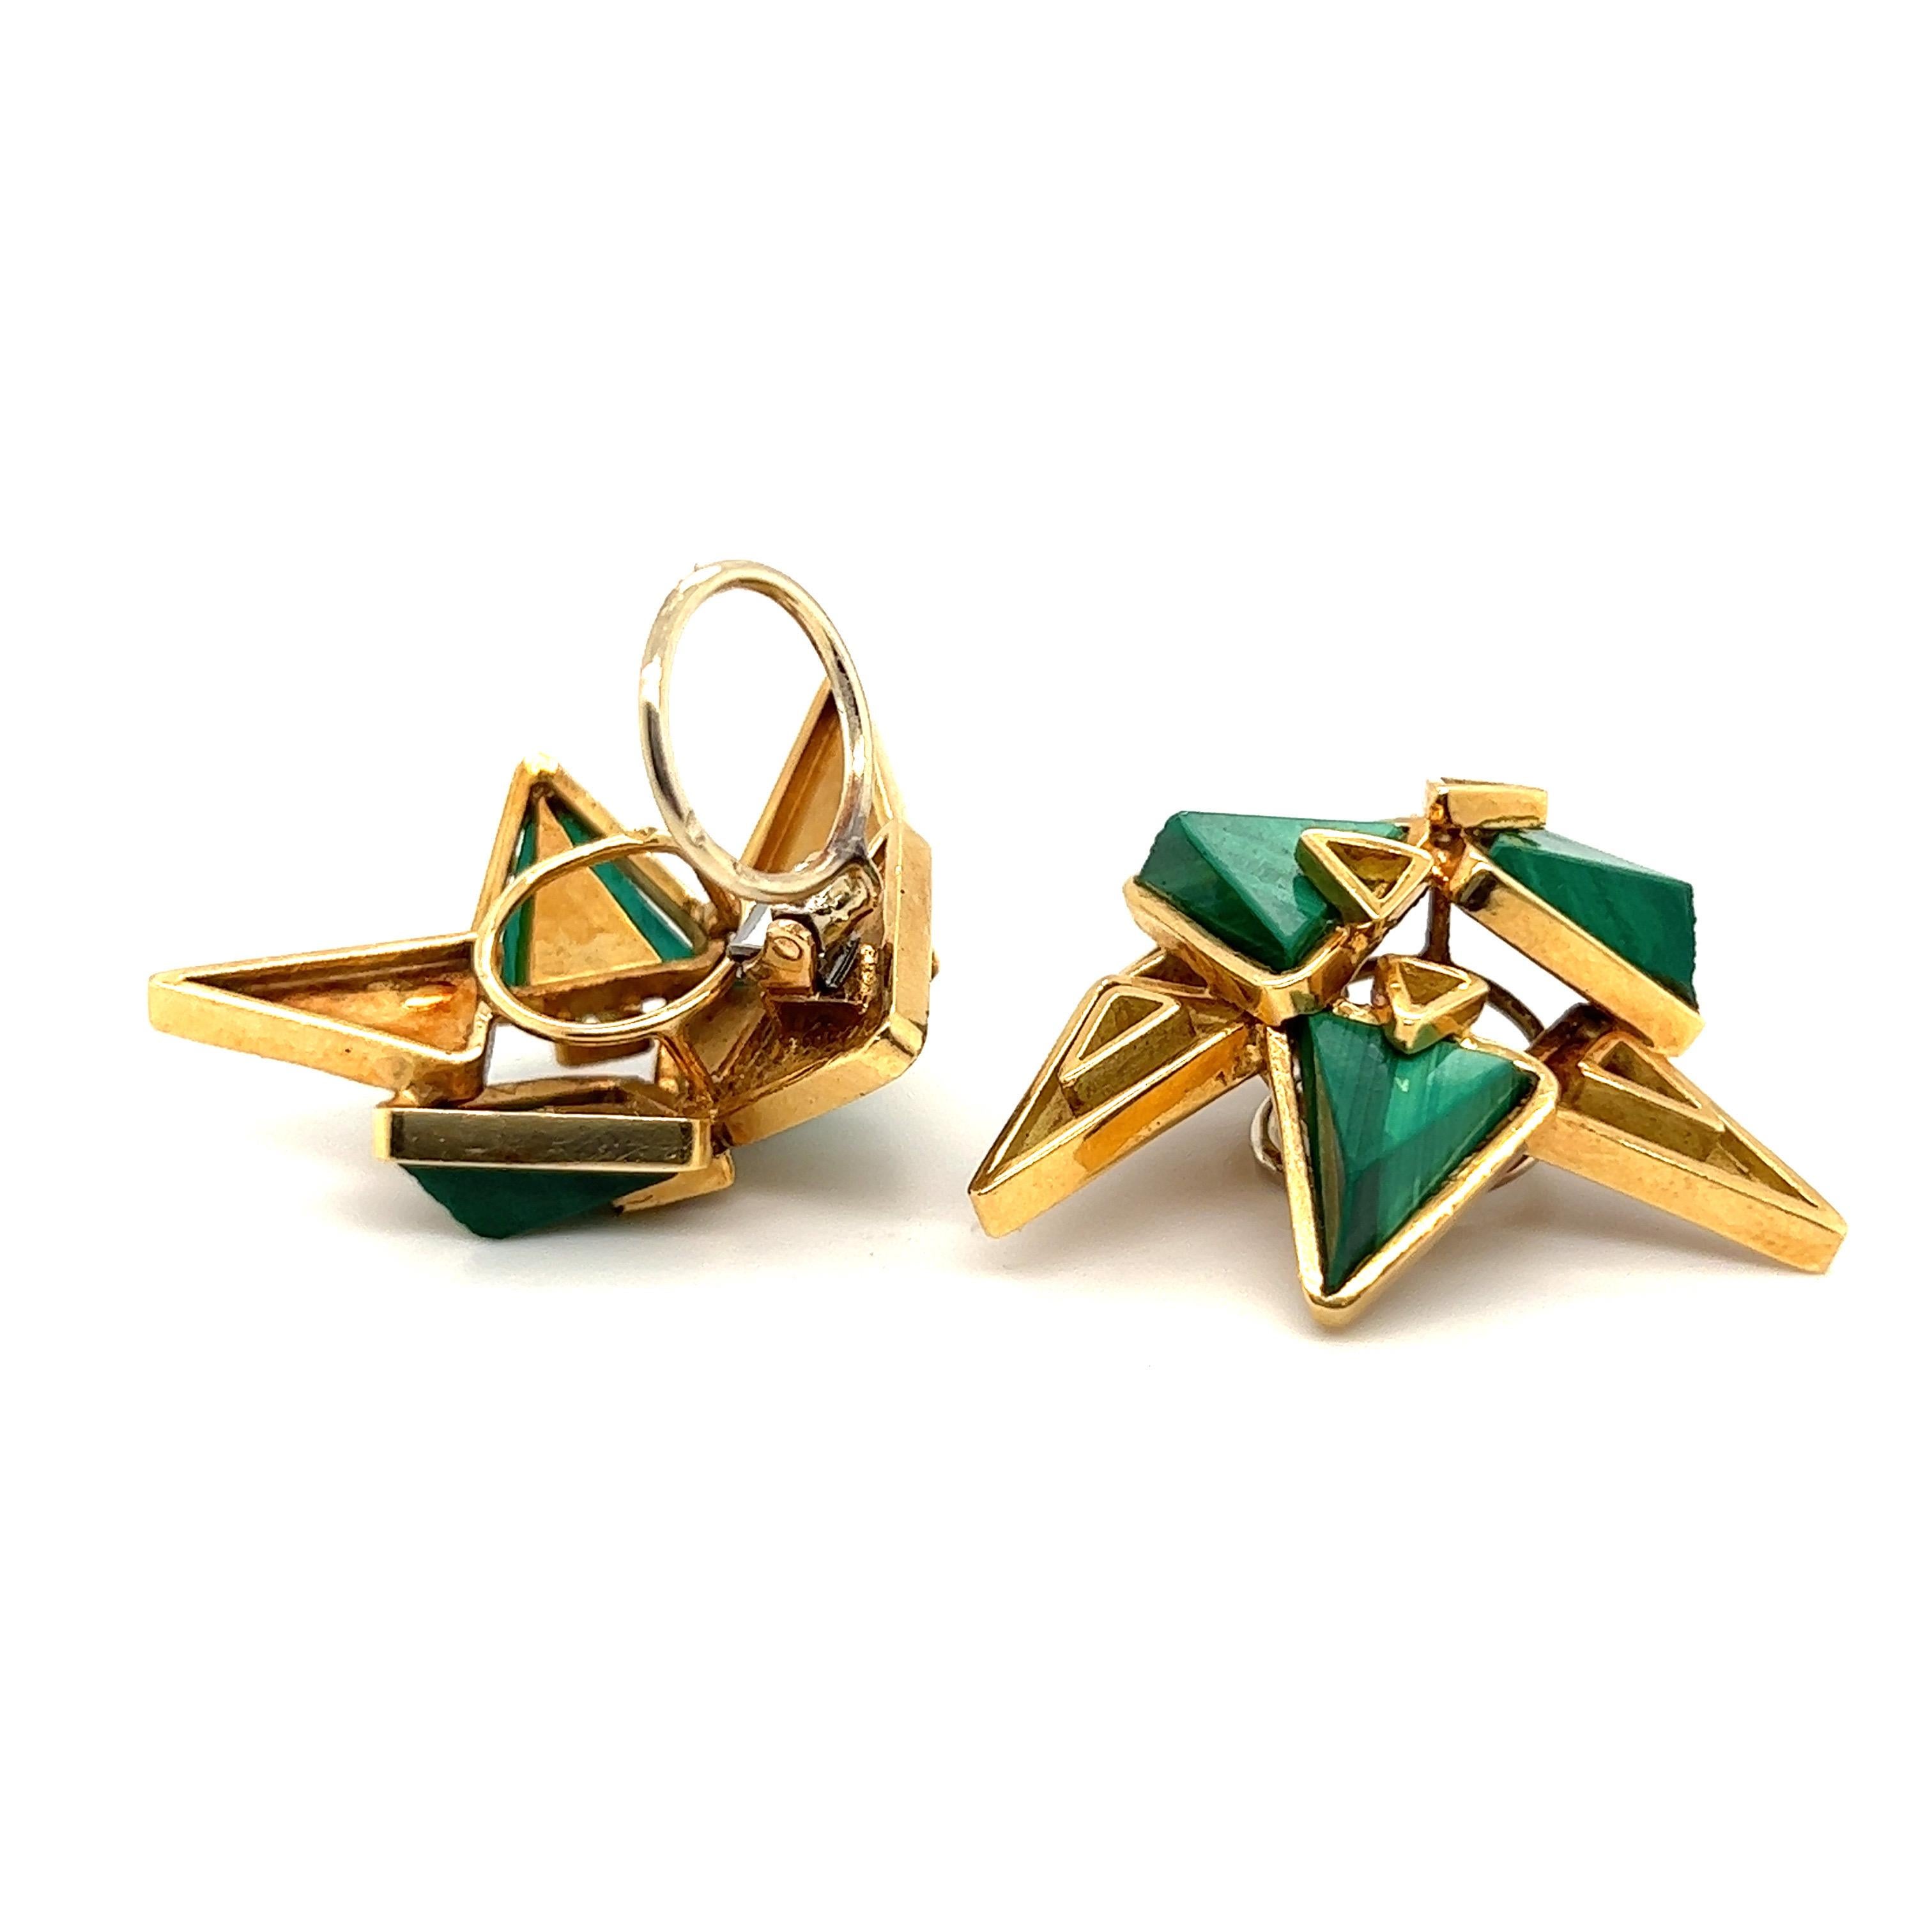 Modernist 18 Karat Yellow Gold and Malachite Earrings by Chaumet, 1970s